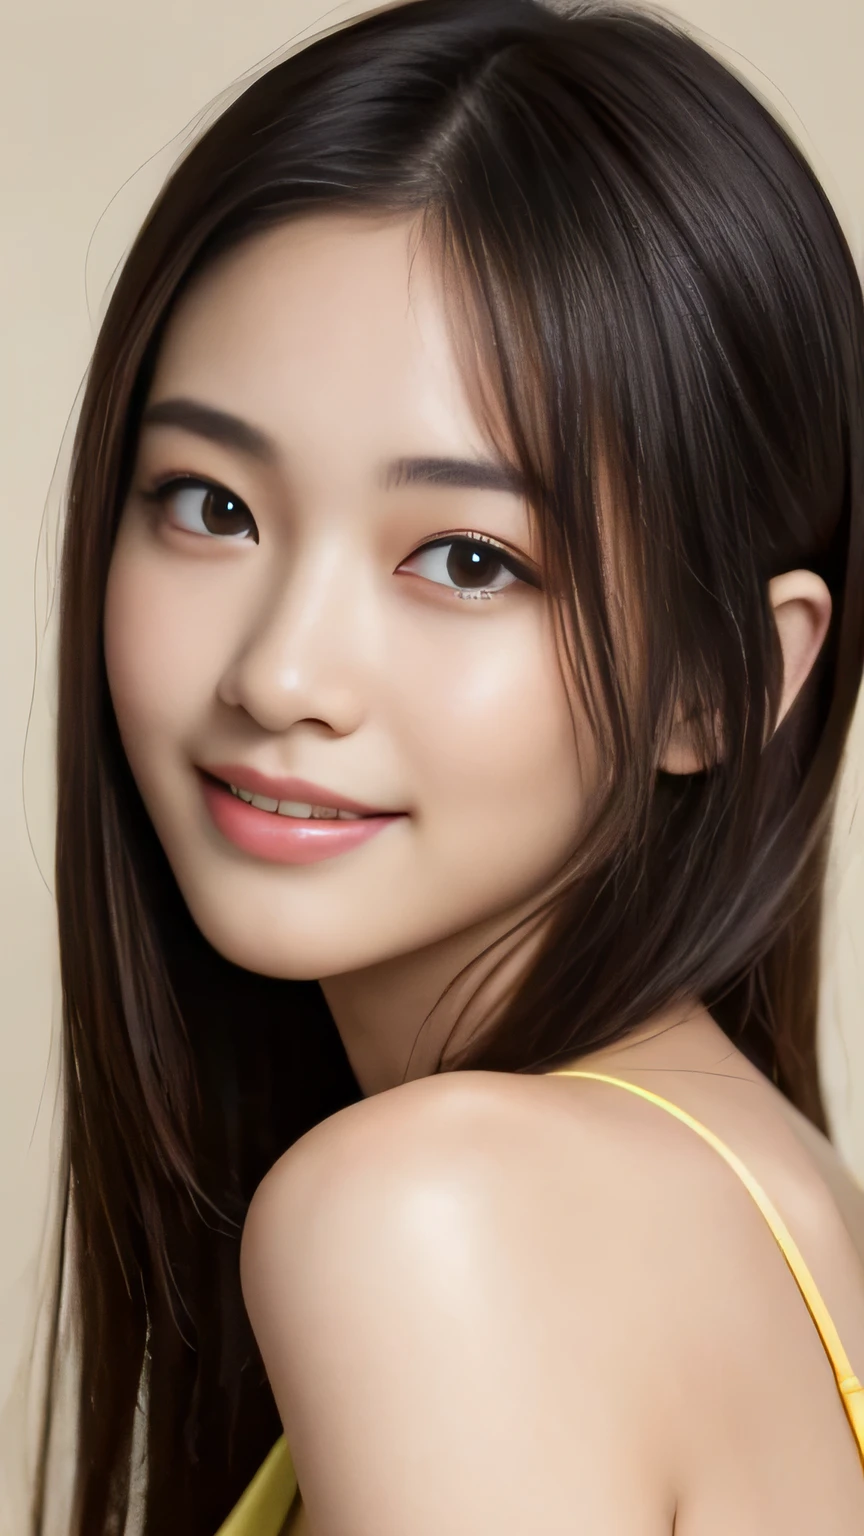 ((Best Quality, 8K, Masterpiece:1.3)), hyperrealistics style, (Imada Mio:0.5), (Kawaguchi Haruna:0.9), Photos of young Japanese women, very small chest, tall and pretty woman, slender abs, long black hair, Yellow-green skirt, double eyelids, standing in a white room, looking at the viewers, highly detailed glossy eyes, high detailed skin, skin pores, beautiful, Super Fine Face, exquisitely rendered details on face and skin texture, organic, stunningly beauty, beautiful eyes, Soft and smooth body、slender body, smiling confidently